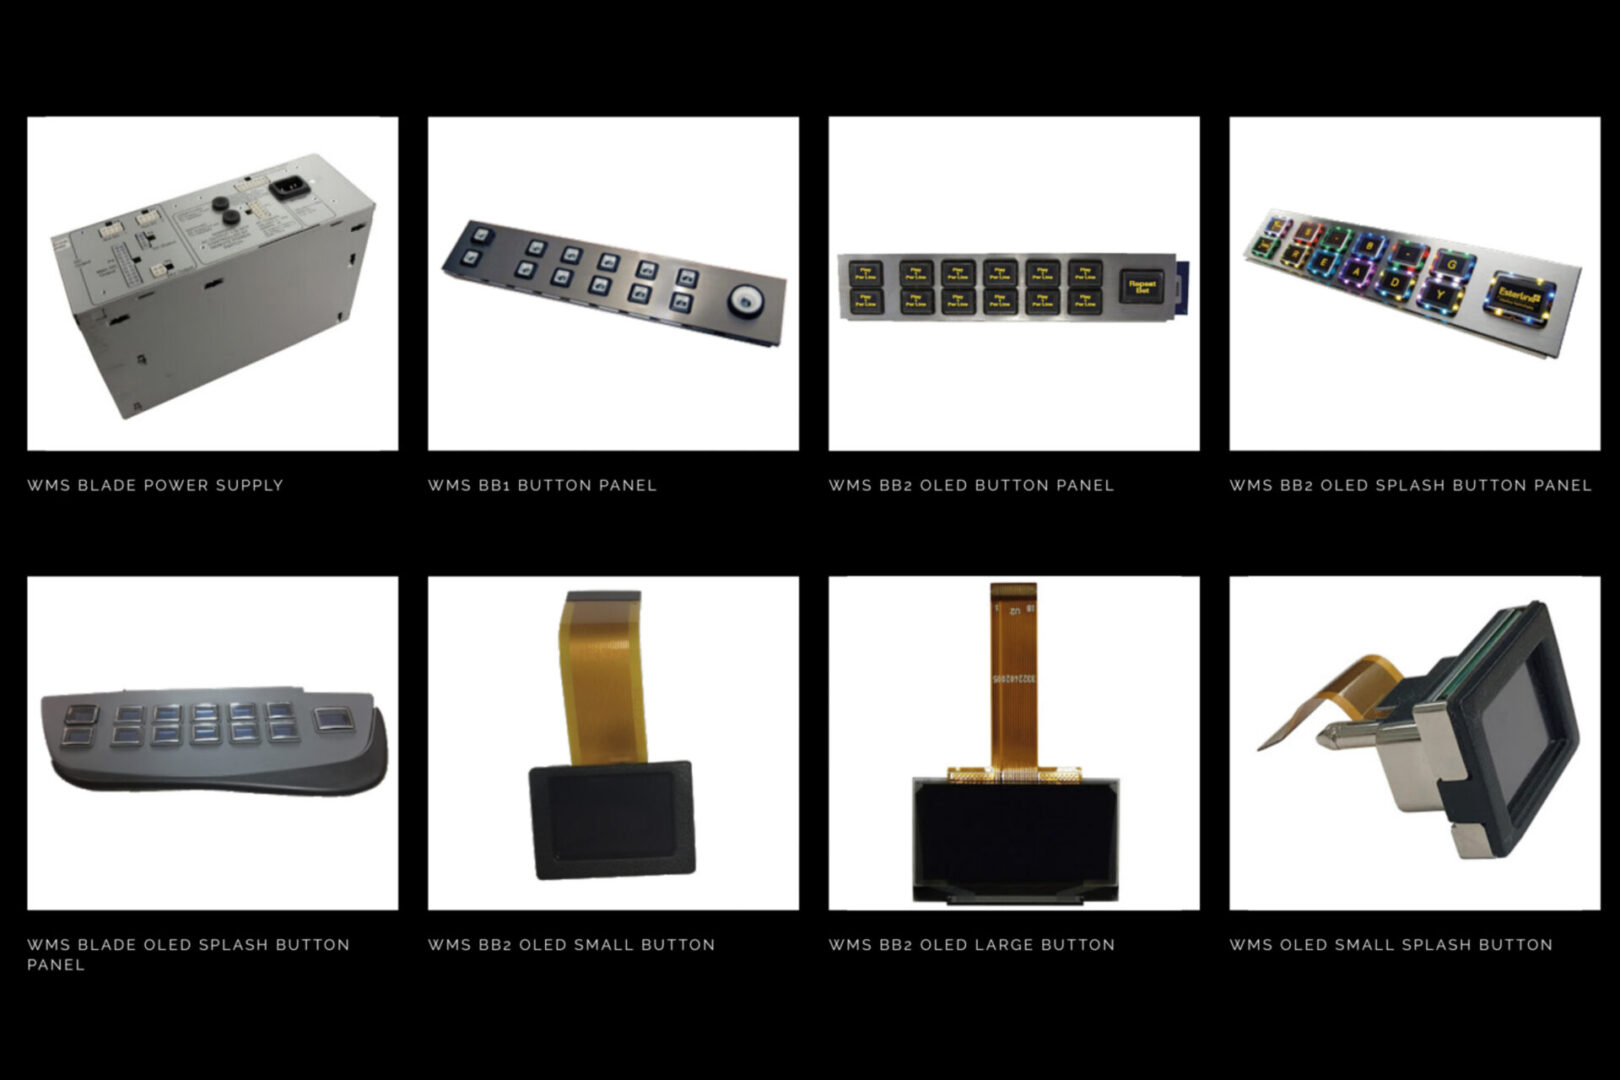 A series of pictures showing different types of electronic devices.